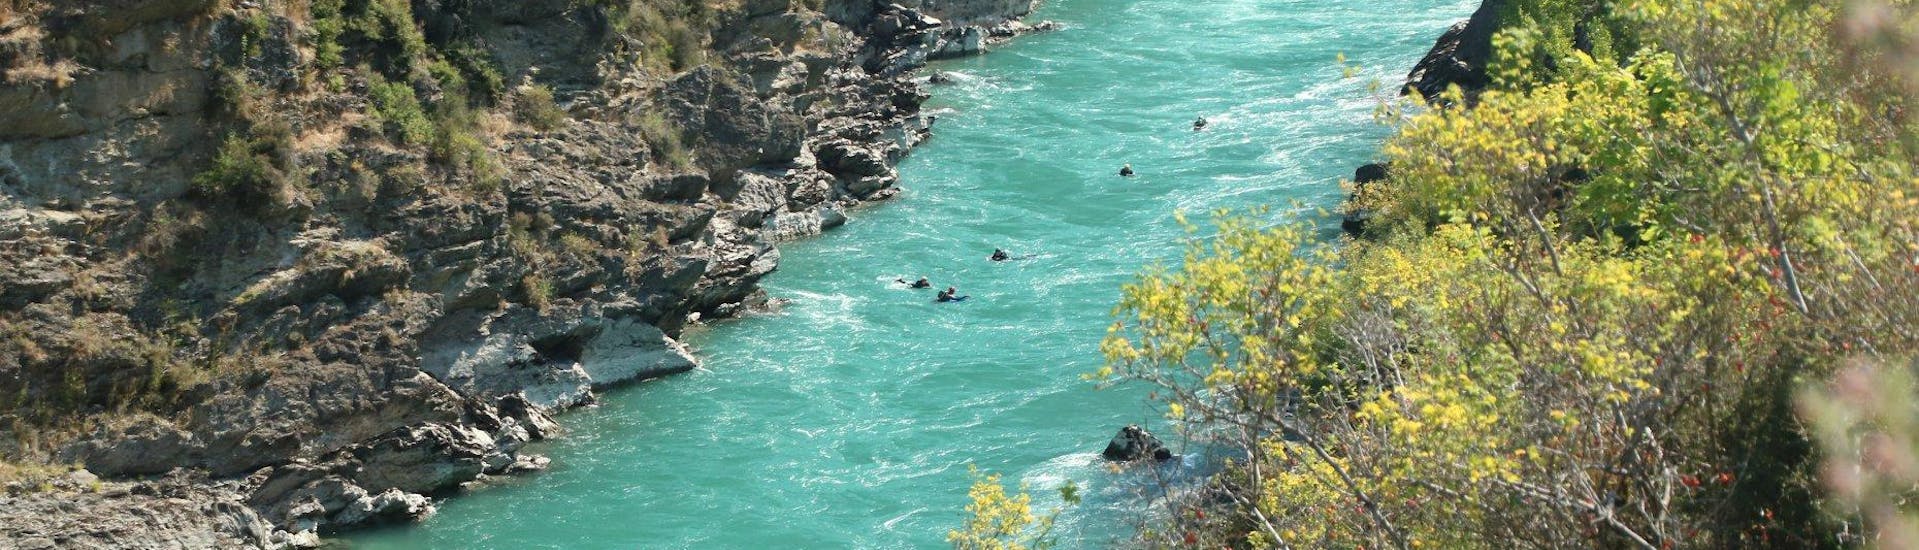 A stunning view on the Kawarau River where Serious Fun Riverboarding offers its different white water activities.